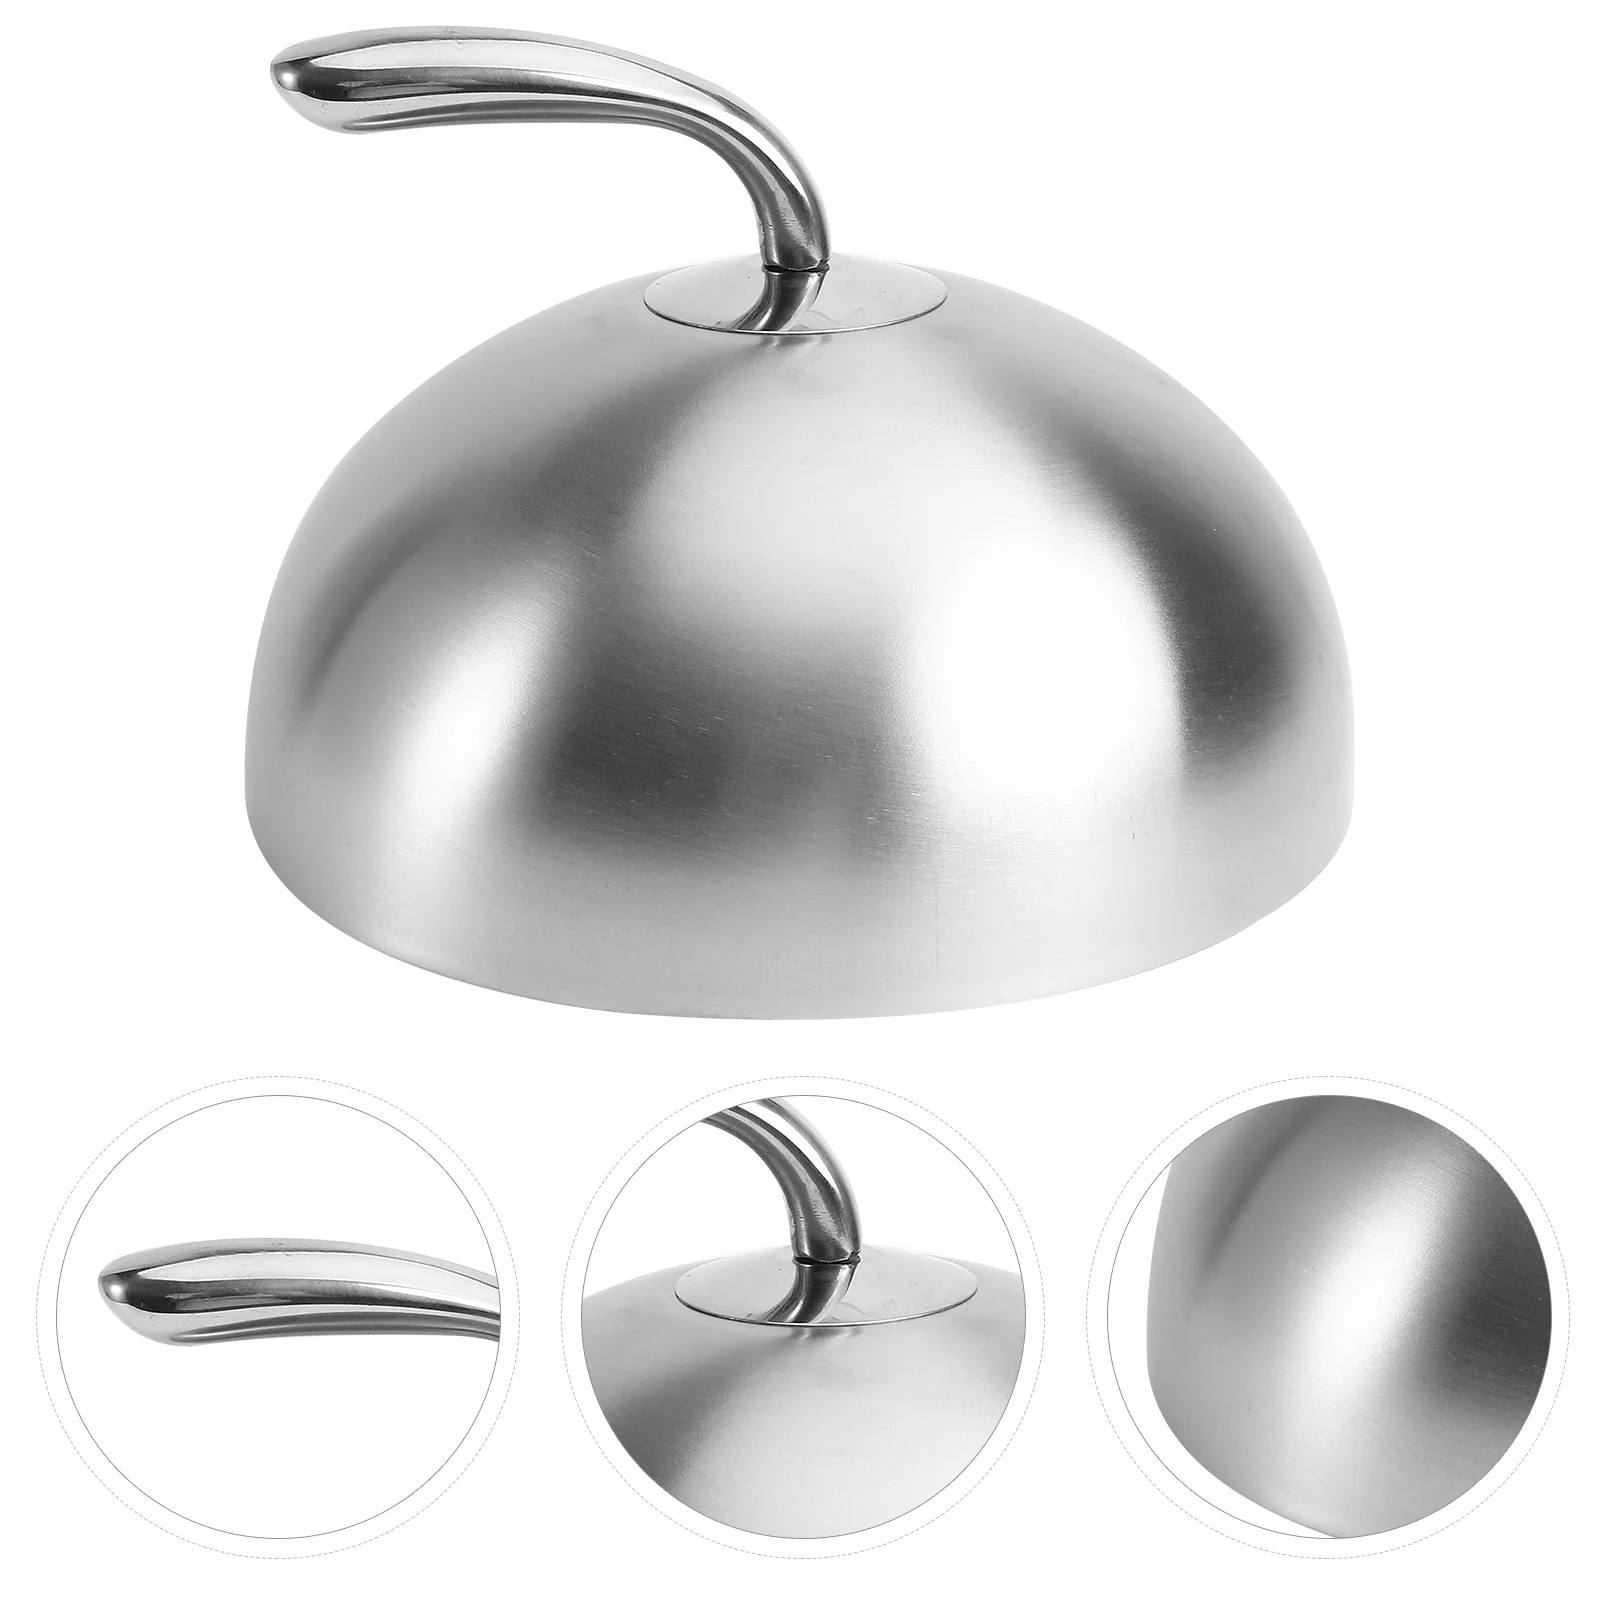 

Stainless Steel Steak Cover Kitchen Supplies Oilproof Dish Protective Food Microwave Covers Restaurant Bell Tent Barbecue